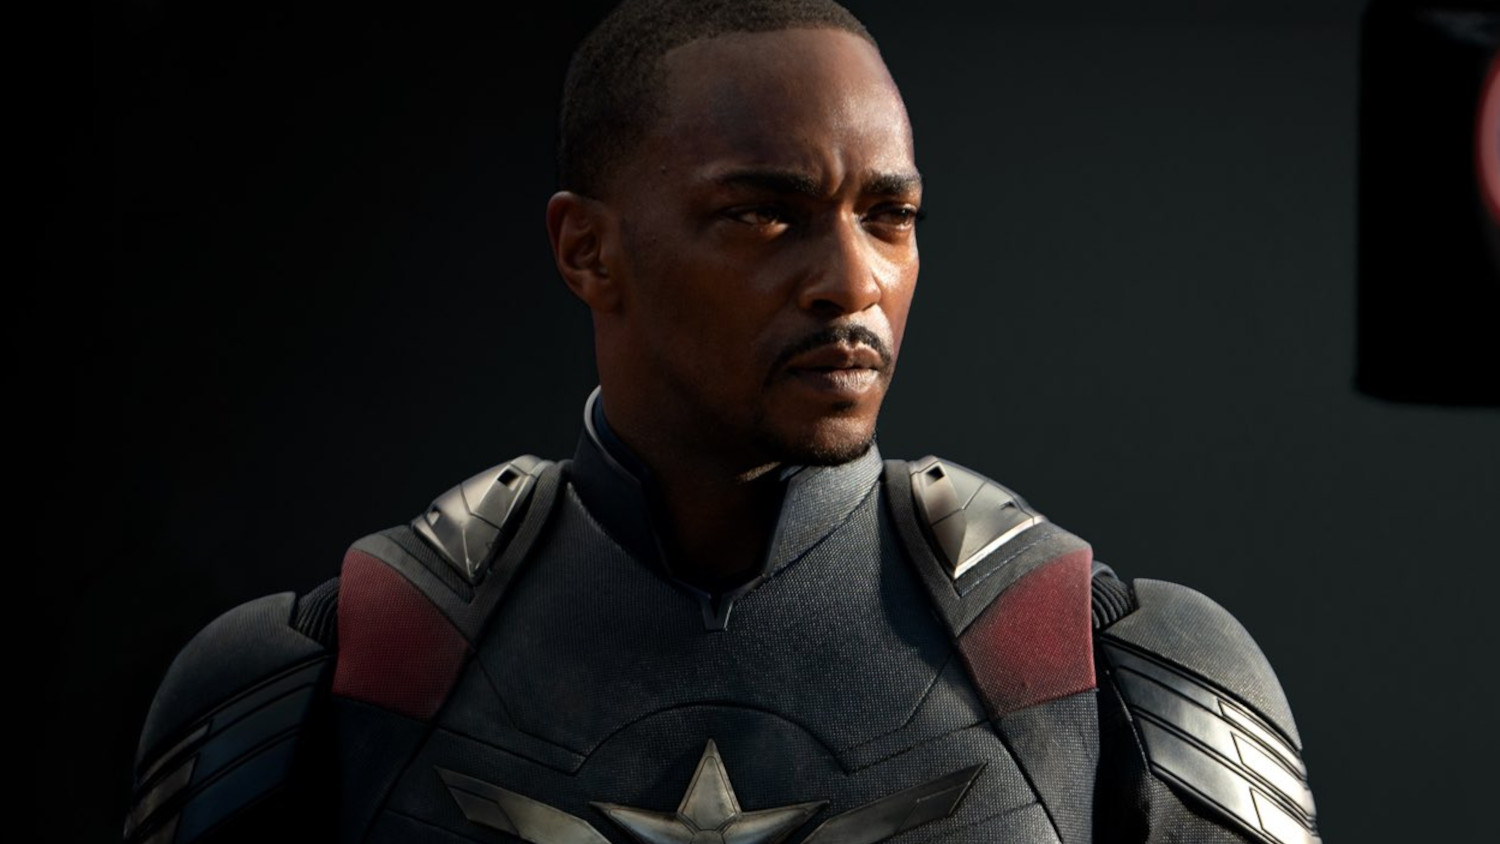 New Captain America Image: Happy 4th of July From Anthony Mackie